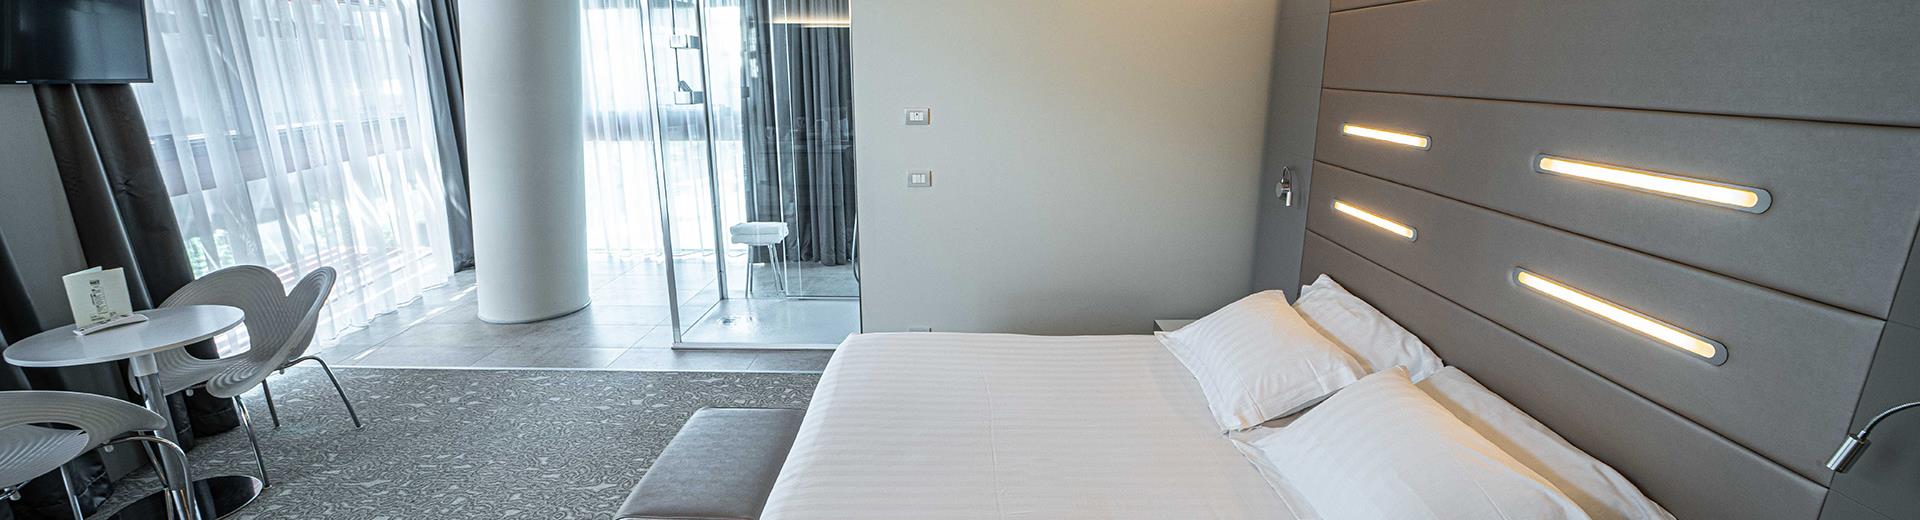 Discover all the amenities of our hotel''s large deluxe rooms!